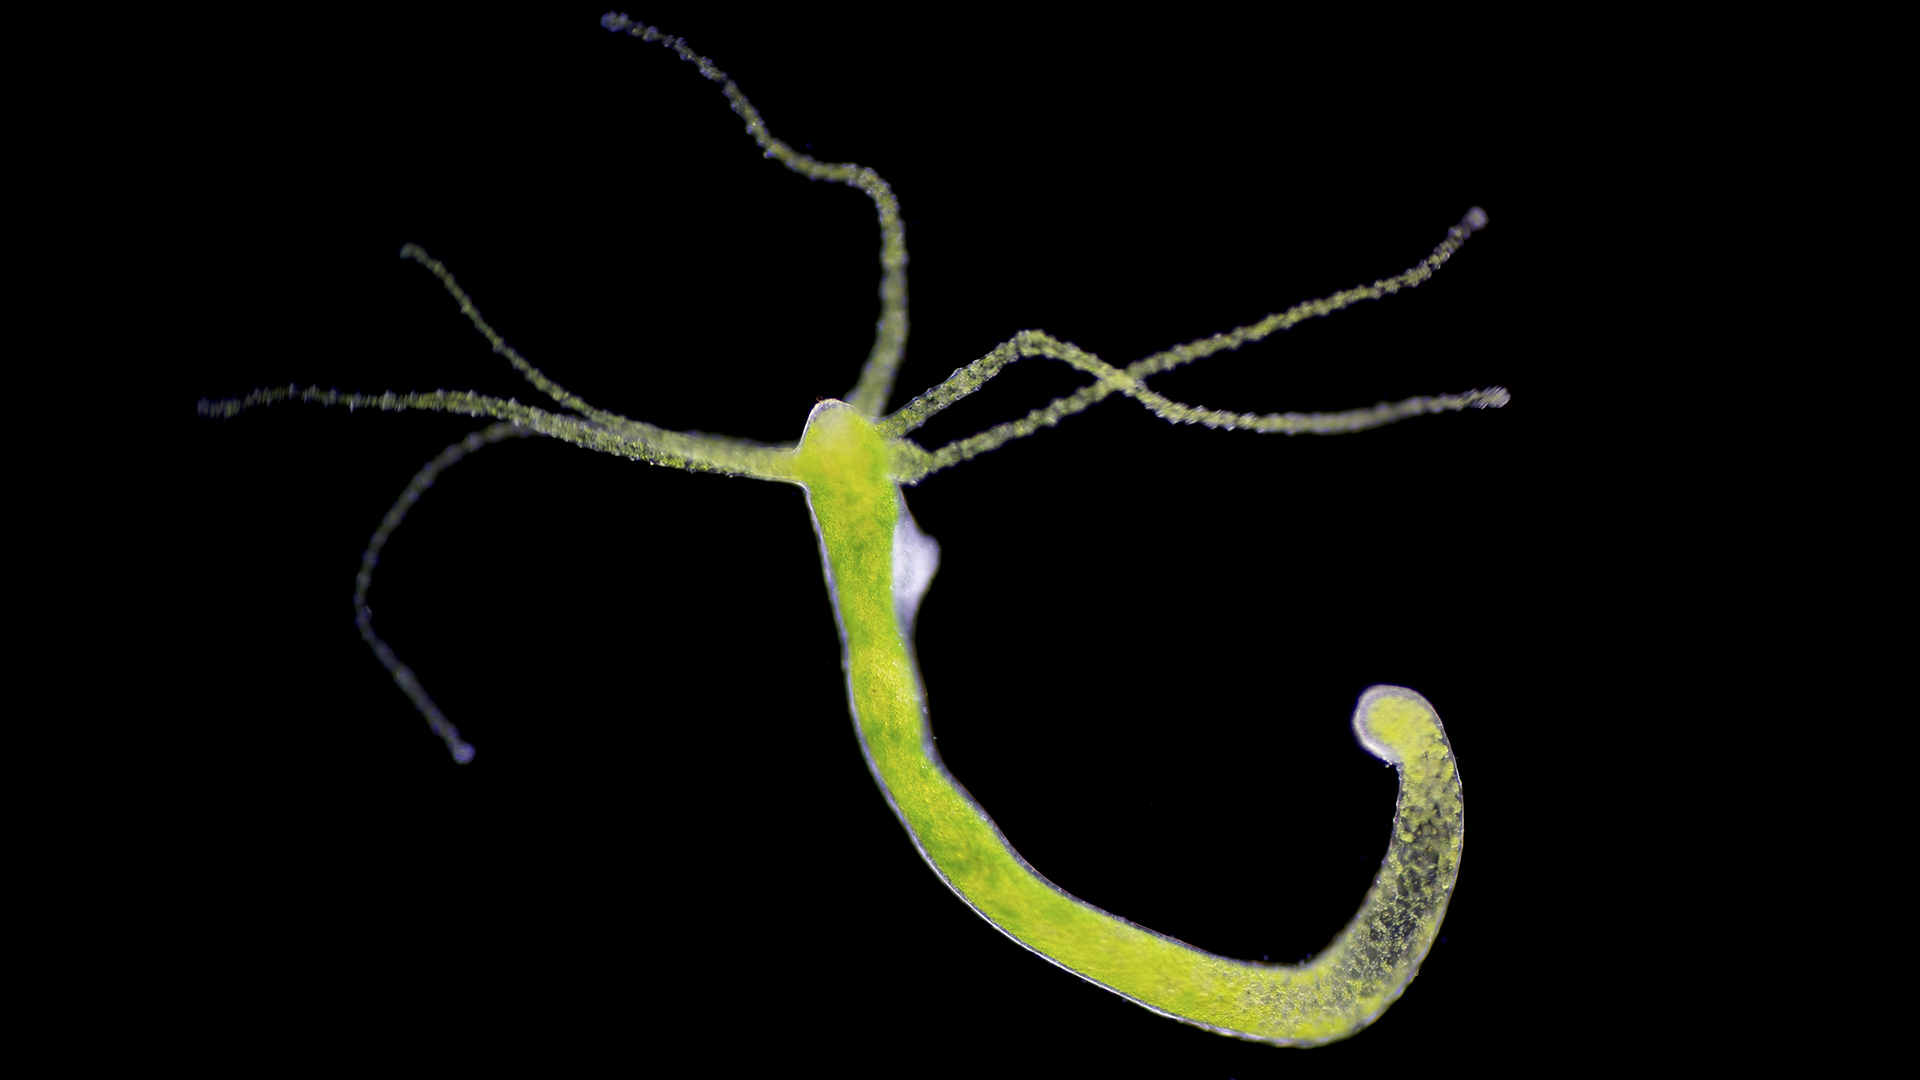 Hydras can regenerate lost body parts — even their heads.